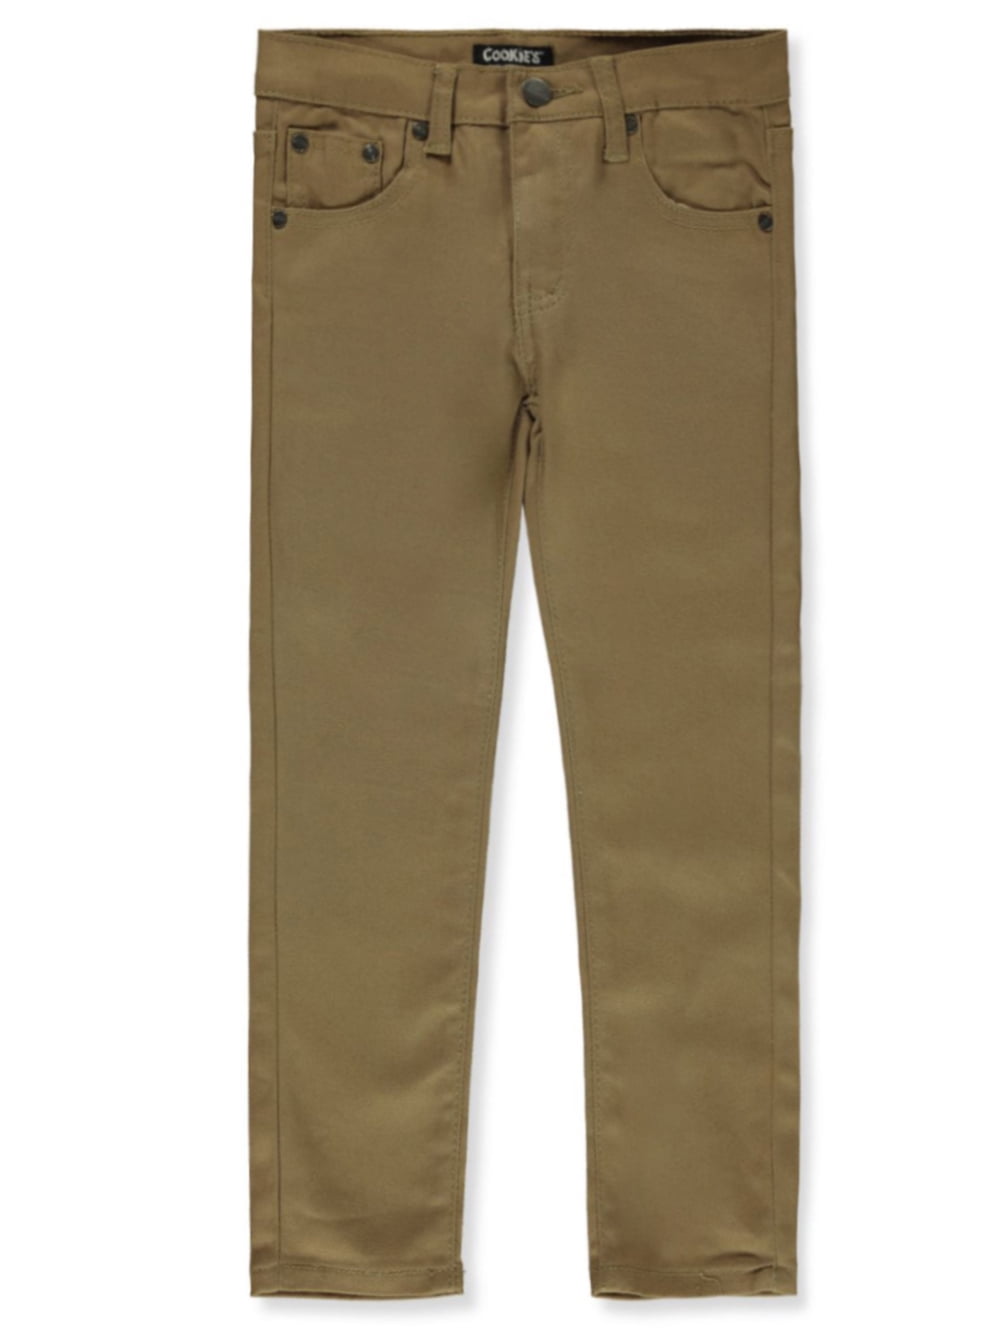 Cookie's Boys' Stretch Jeans - wheat, 3t (Toddler) - Walmart.com